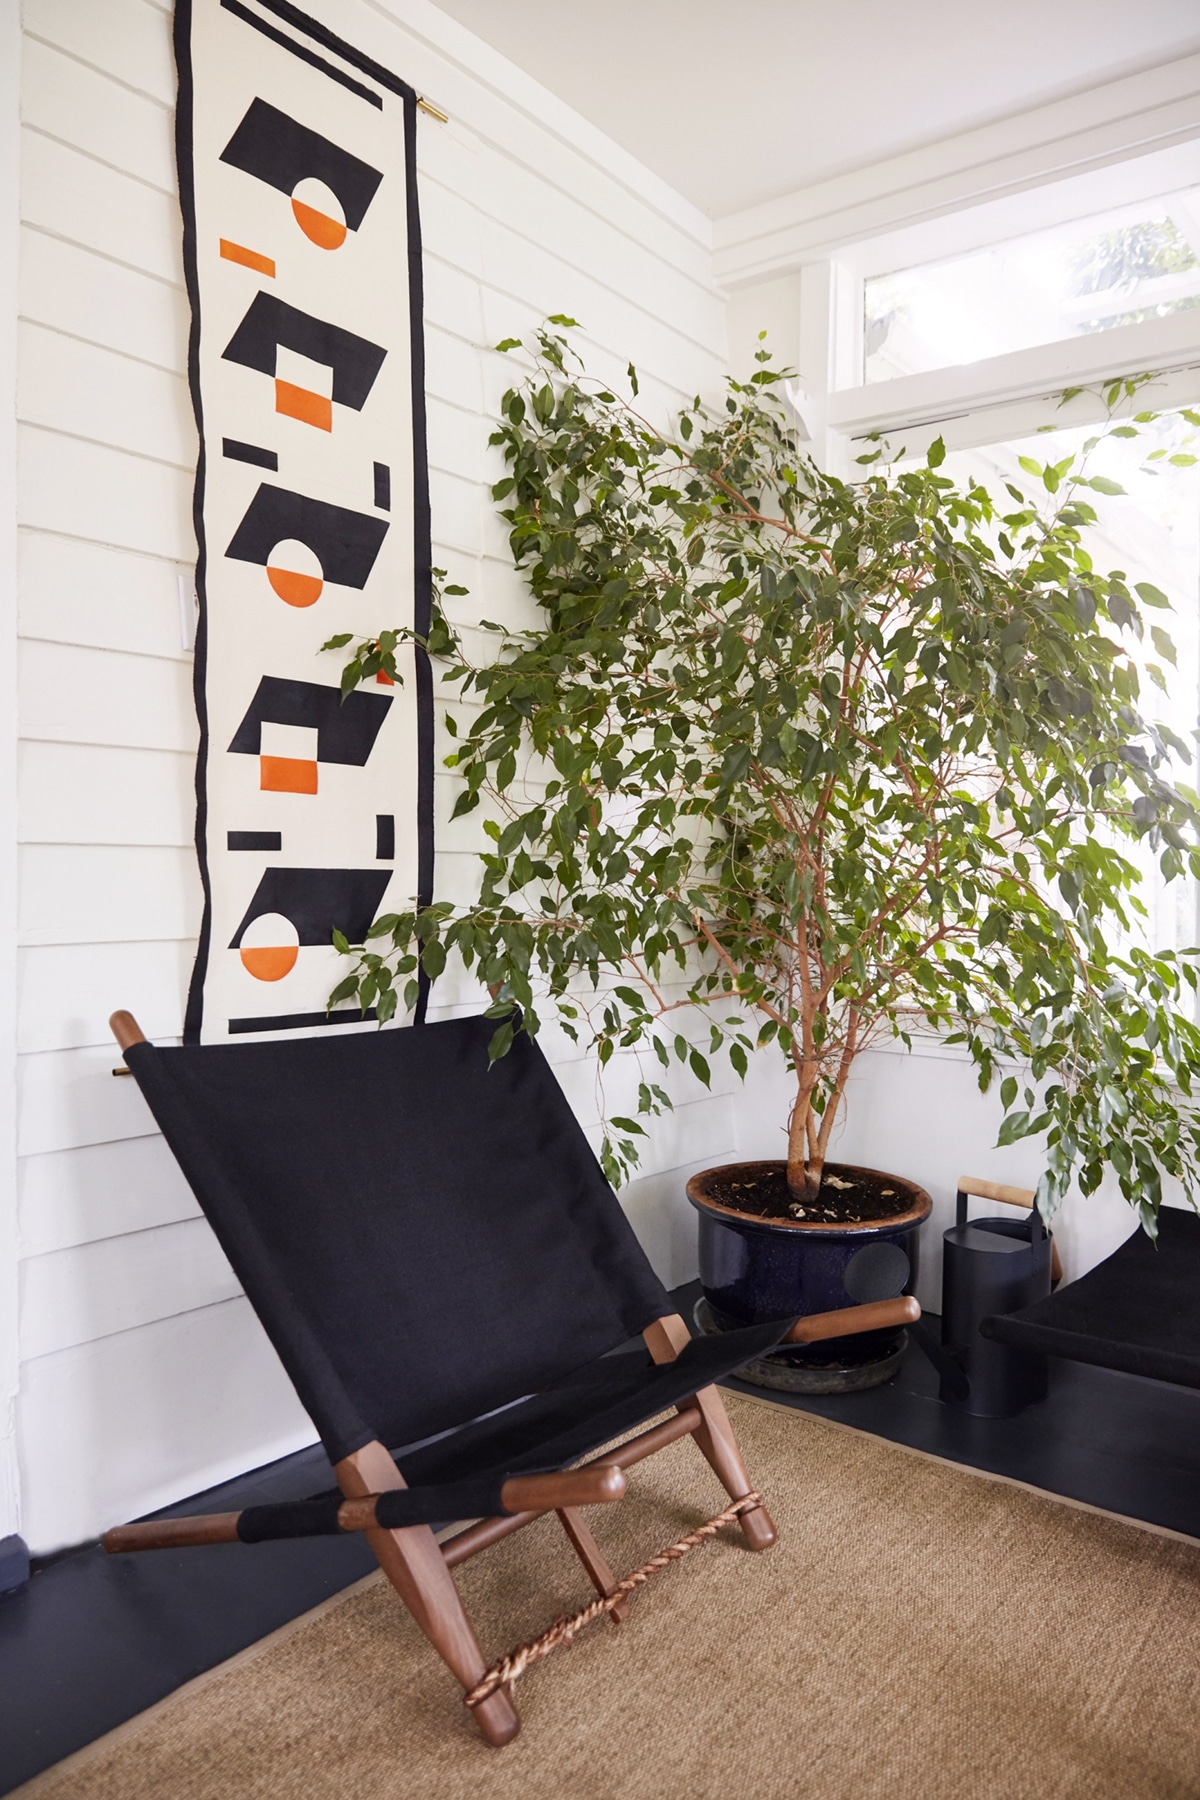 vintage organic furnishings and wall hanging in the sun porch | modern shaker house tour designed by cs valentin on coco kelley